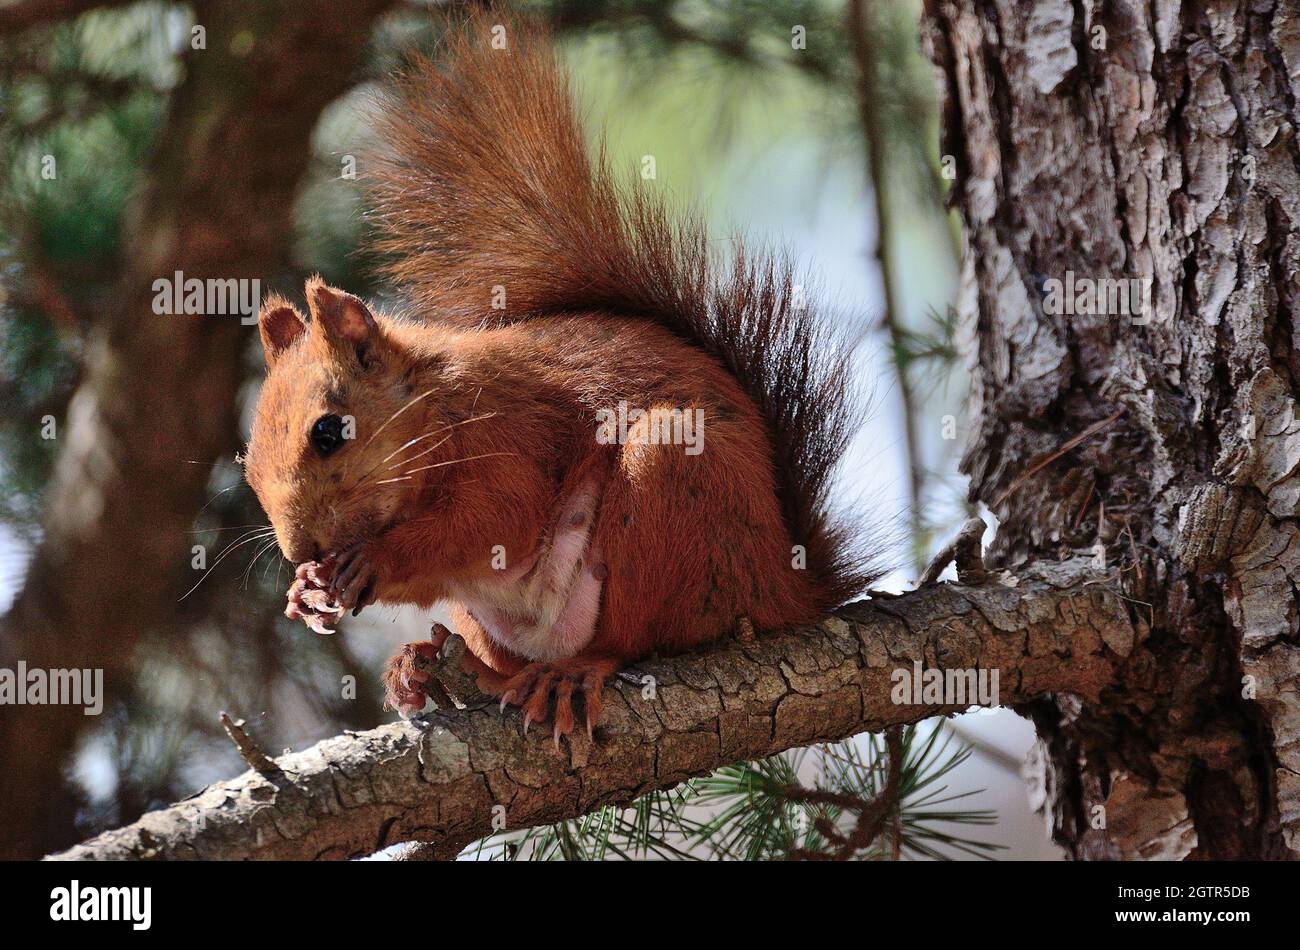 Squirrel On Tree Trunk Stock Photo